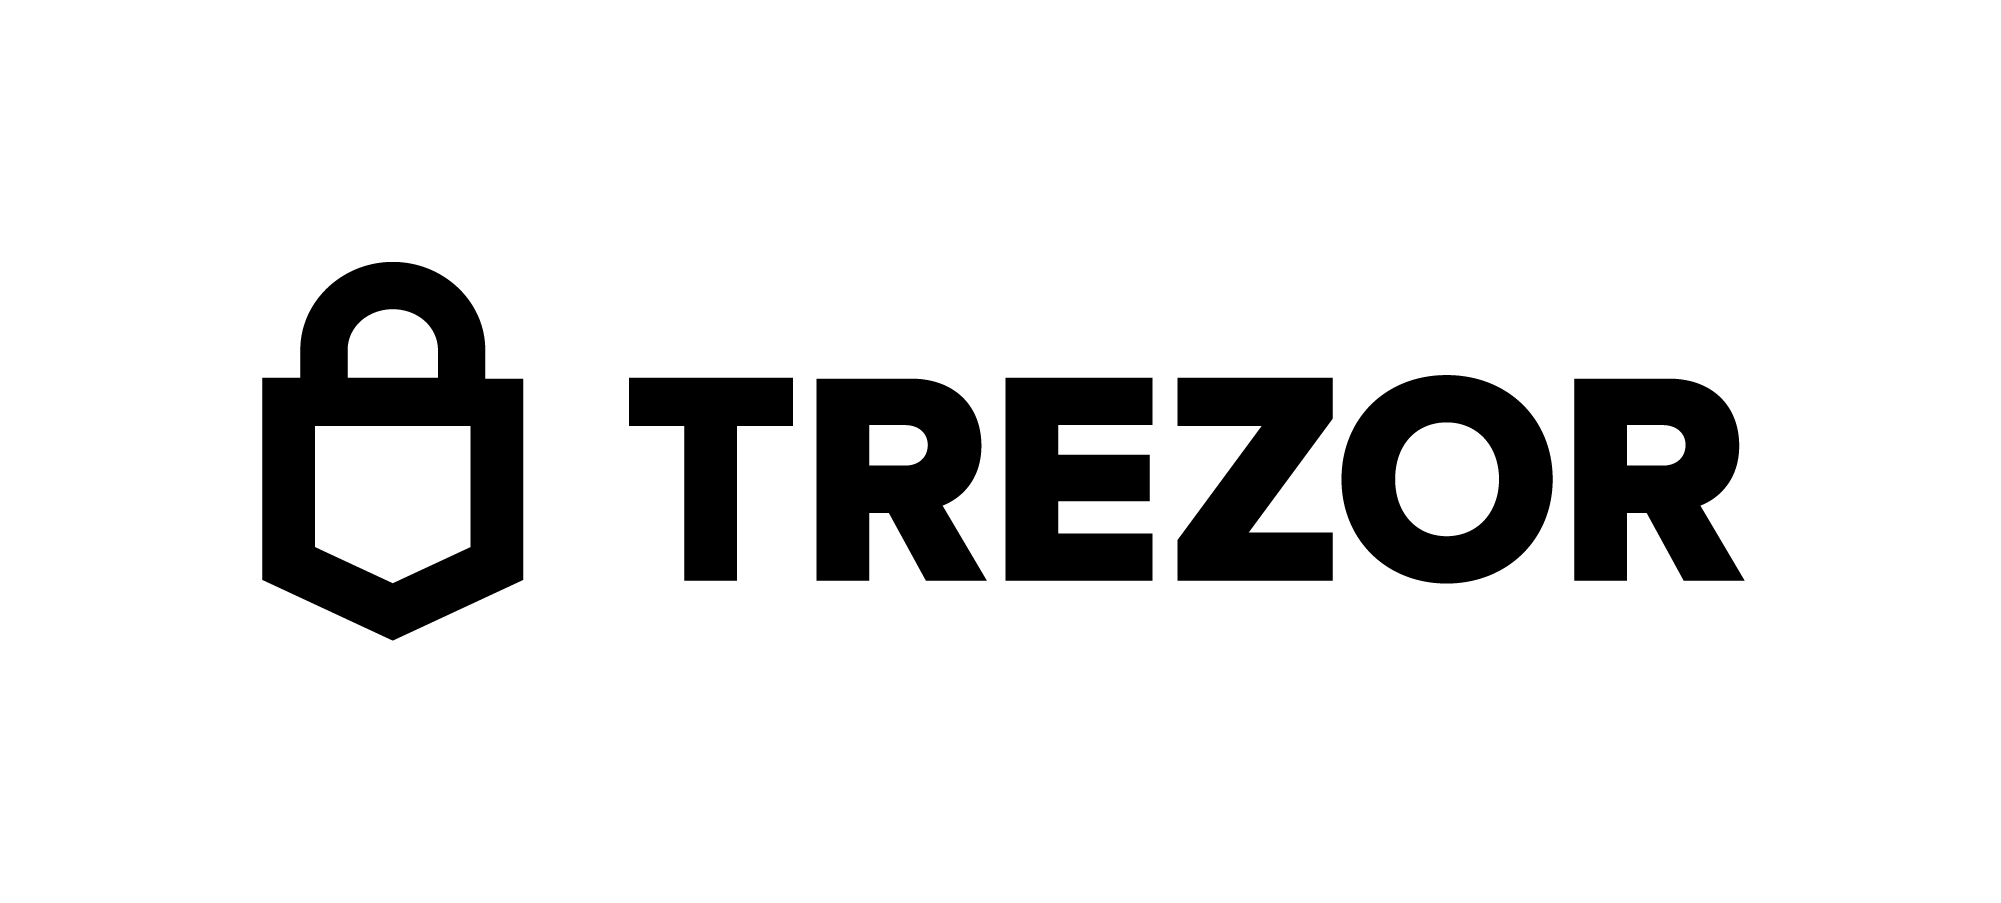 Trezor expands Trezor Academy education initiative to 20 more countries worldwide